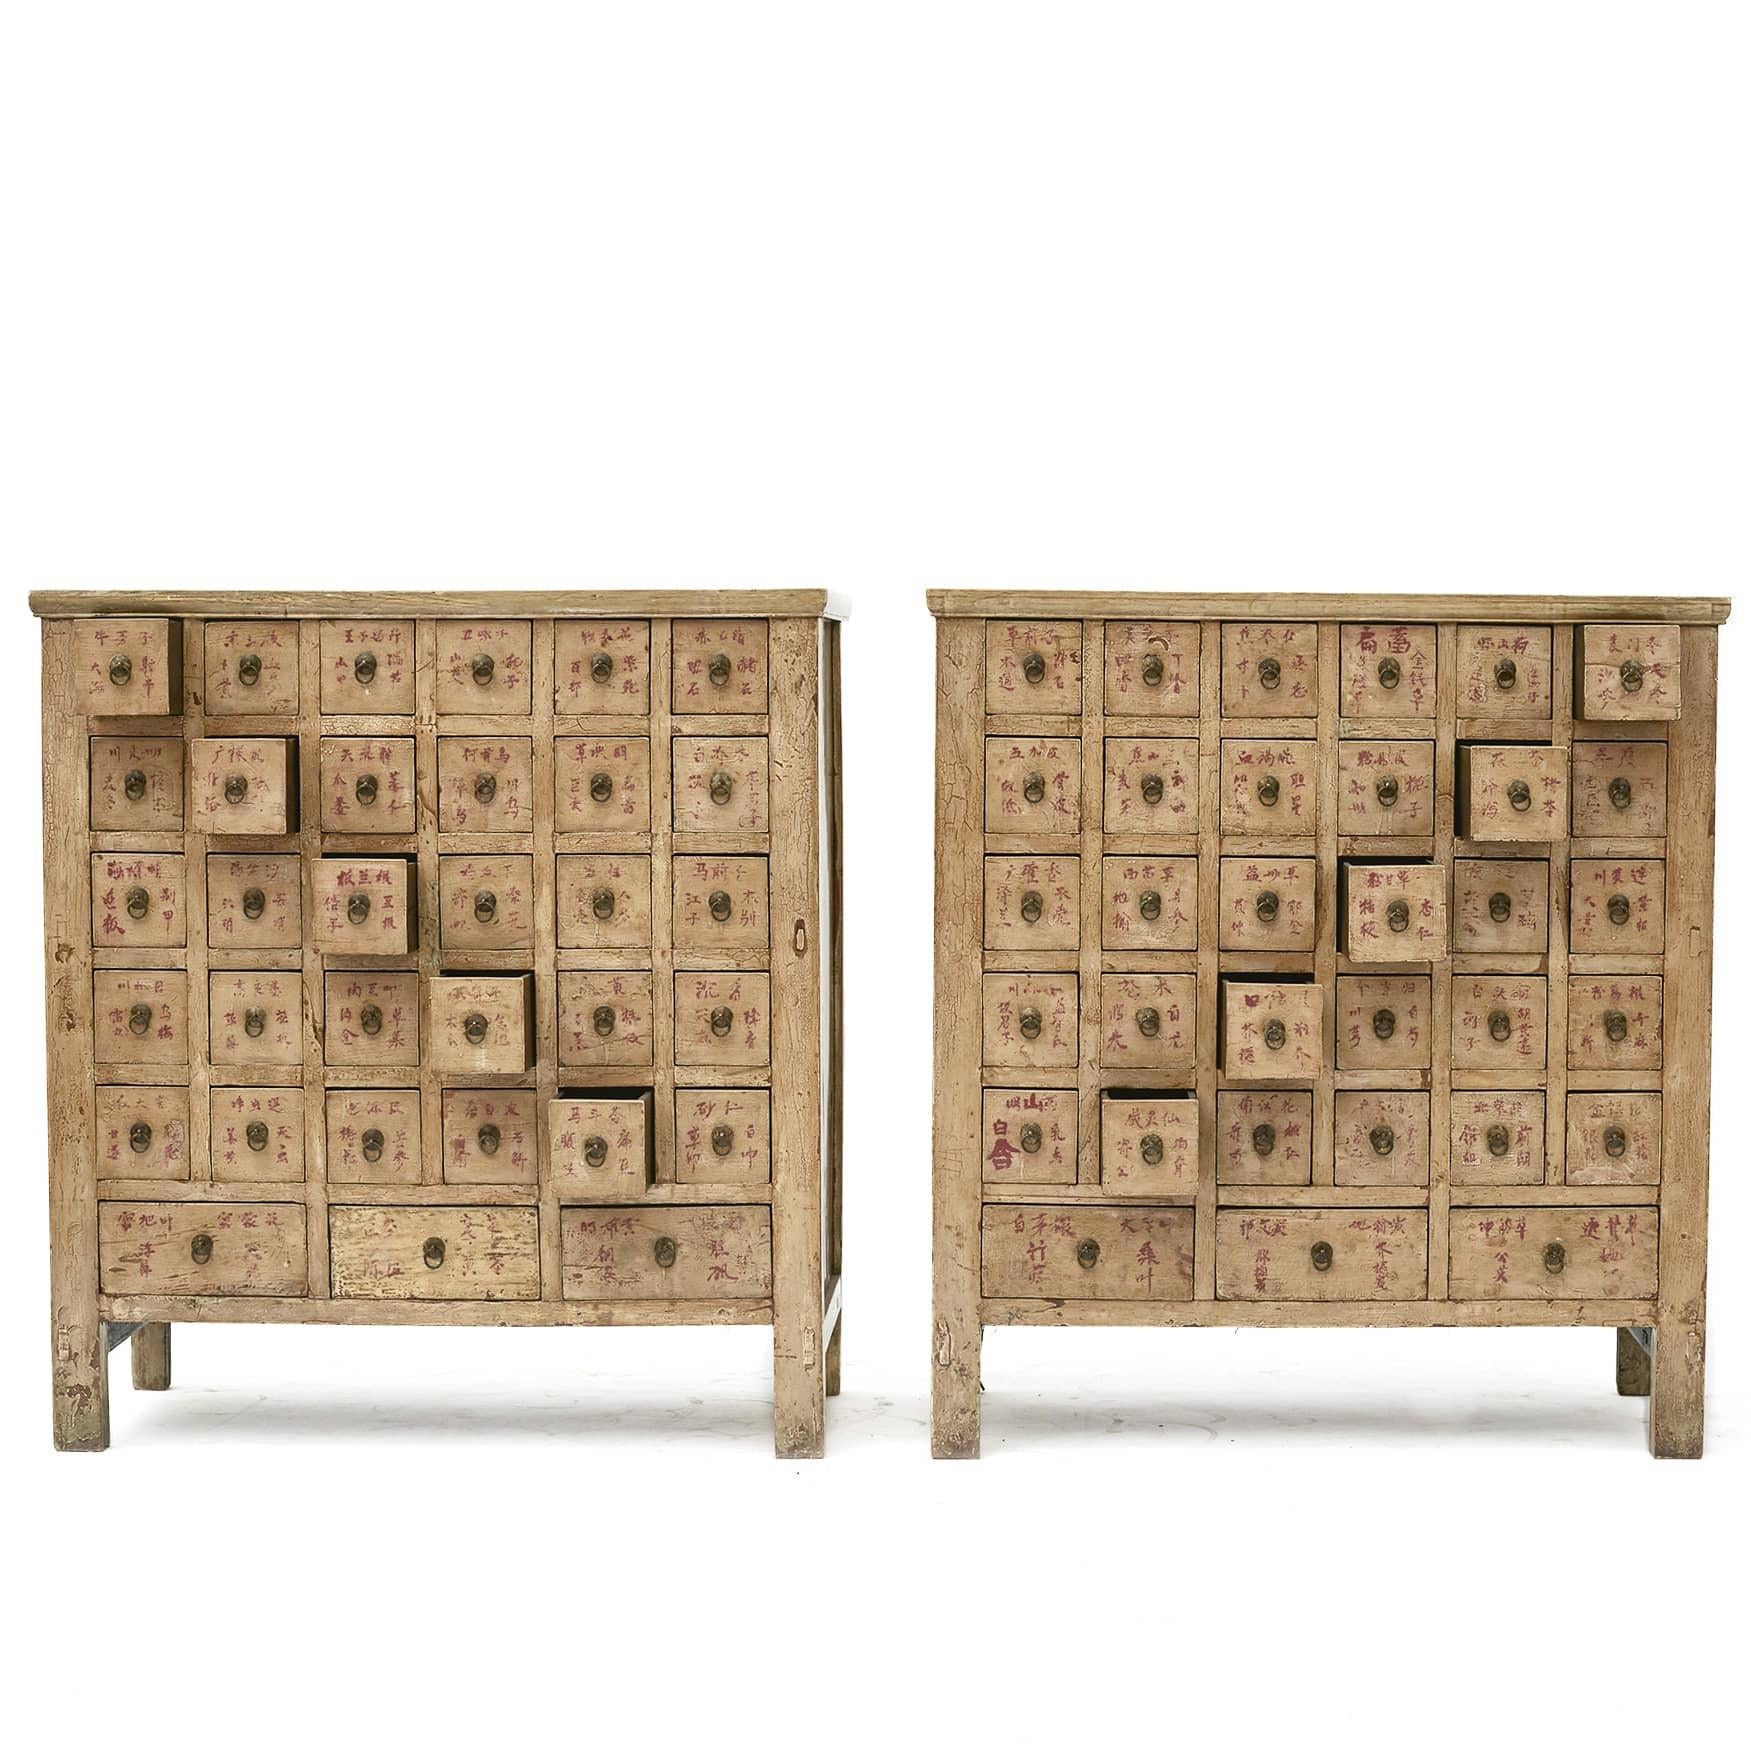 Chinese apothecary / pharmacy medicine chests. Made of elm wood with ivory lacquer.
Each with 33 drawers (30 small square drawers + 3 larger ).
These were used to store and organise Chinese herbs and the drawers were labeled according to the herbs